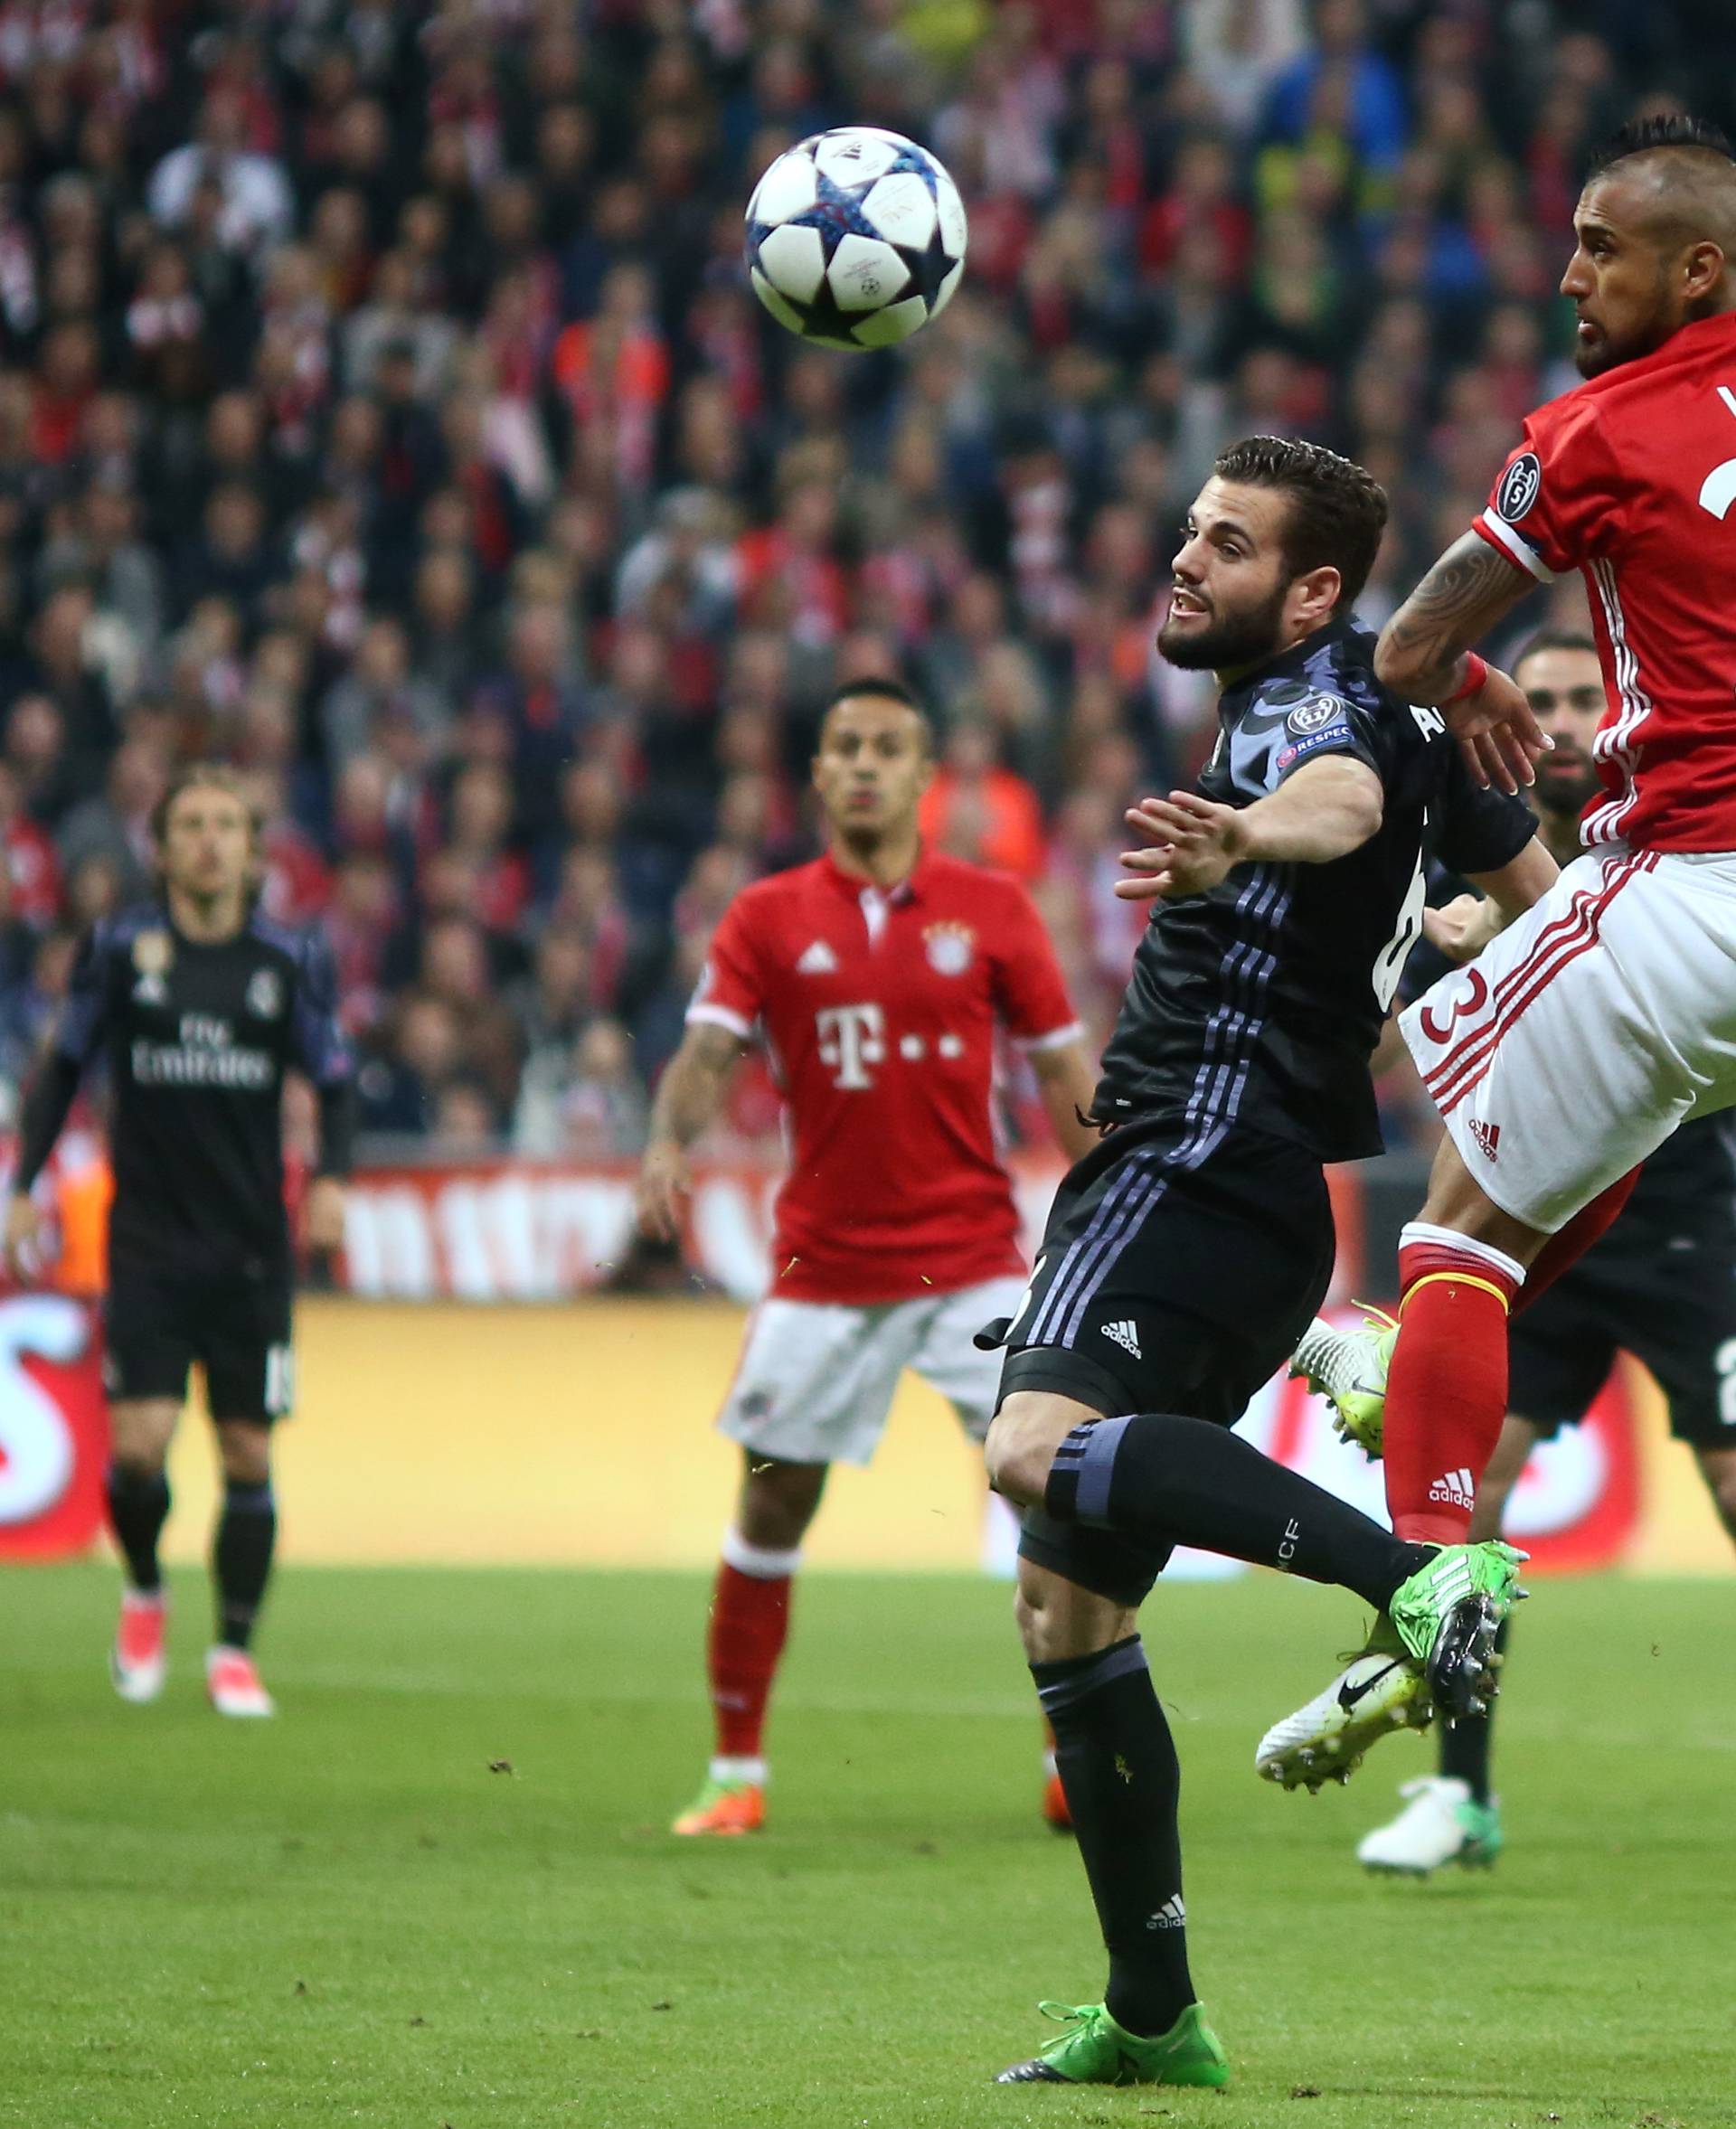 Bayern Munich's Arturo Vidal in action with Real Madrid's Nacho